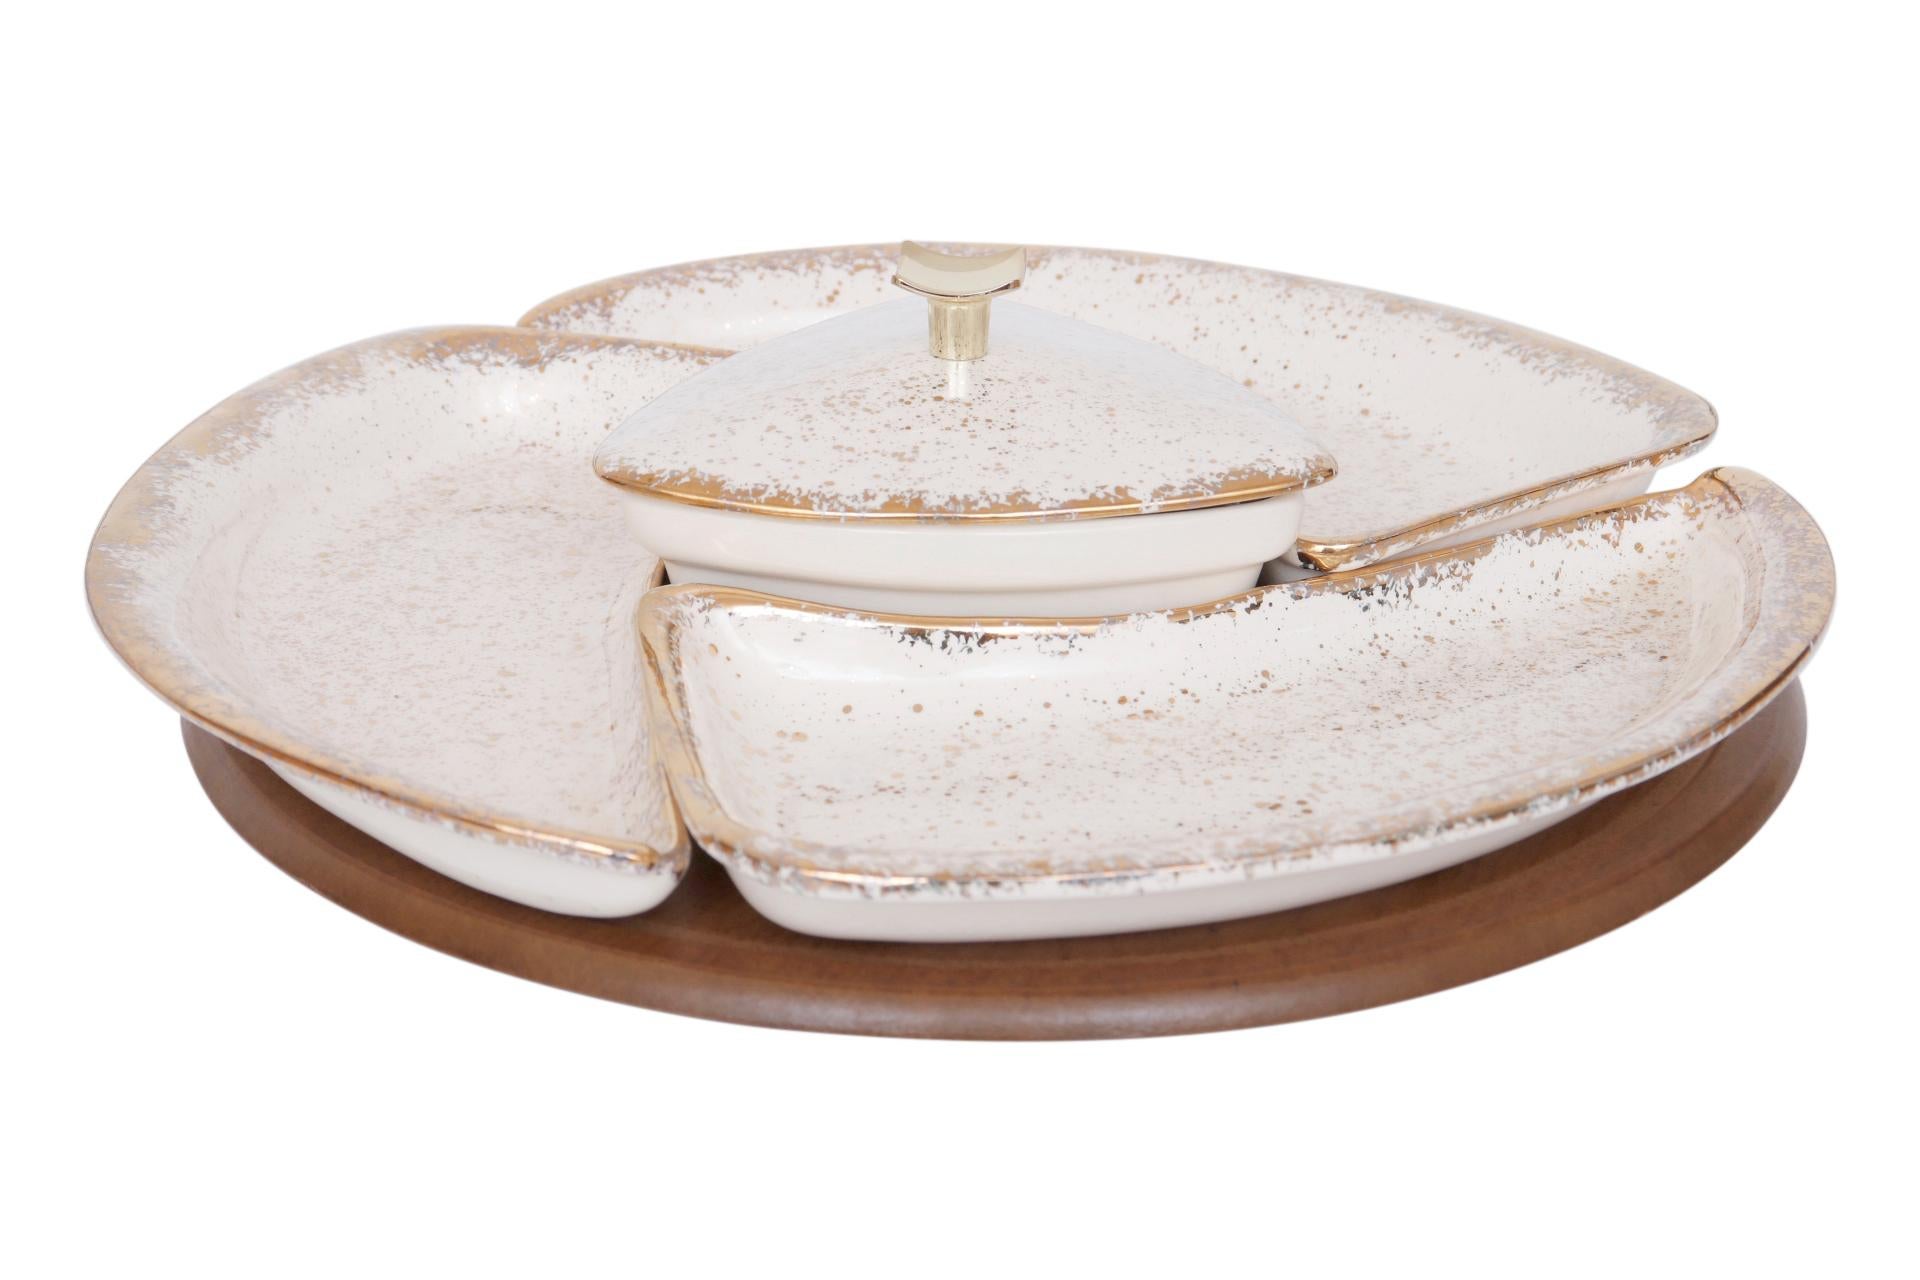 A divided serving dish set with a matching lazy Susan made by Maurice & Co of California. A central triangular bowl and three curved triangular dishes are an off white flecked and edged with gold. The bowl has a lid that lifts with a concave